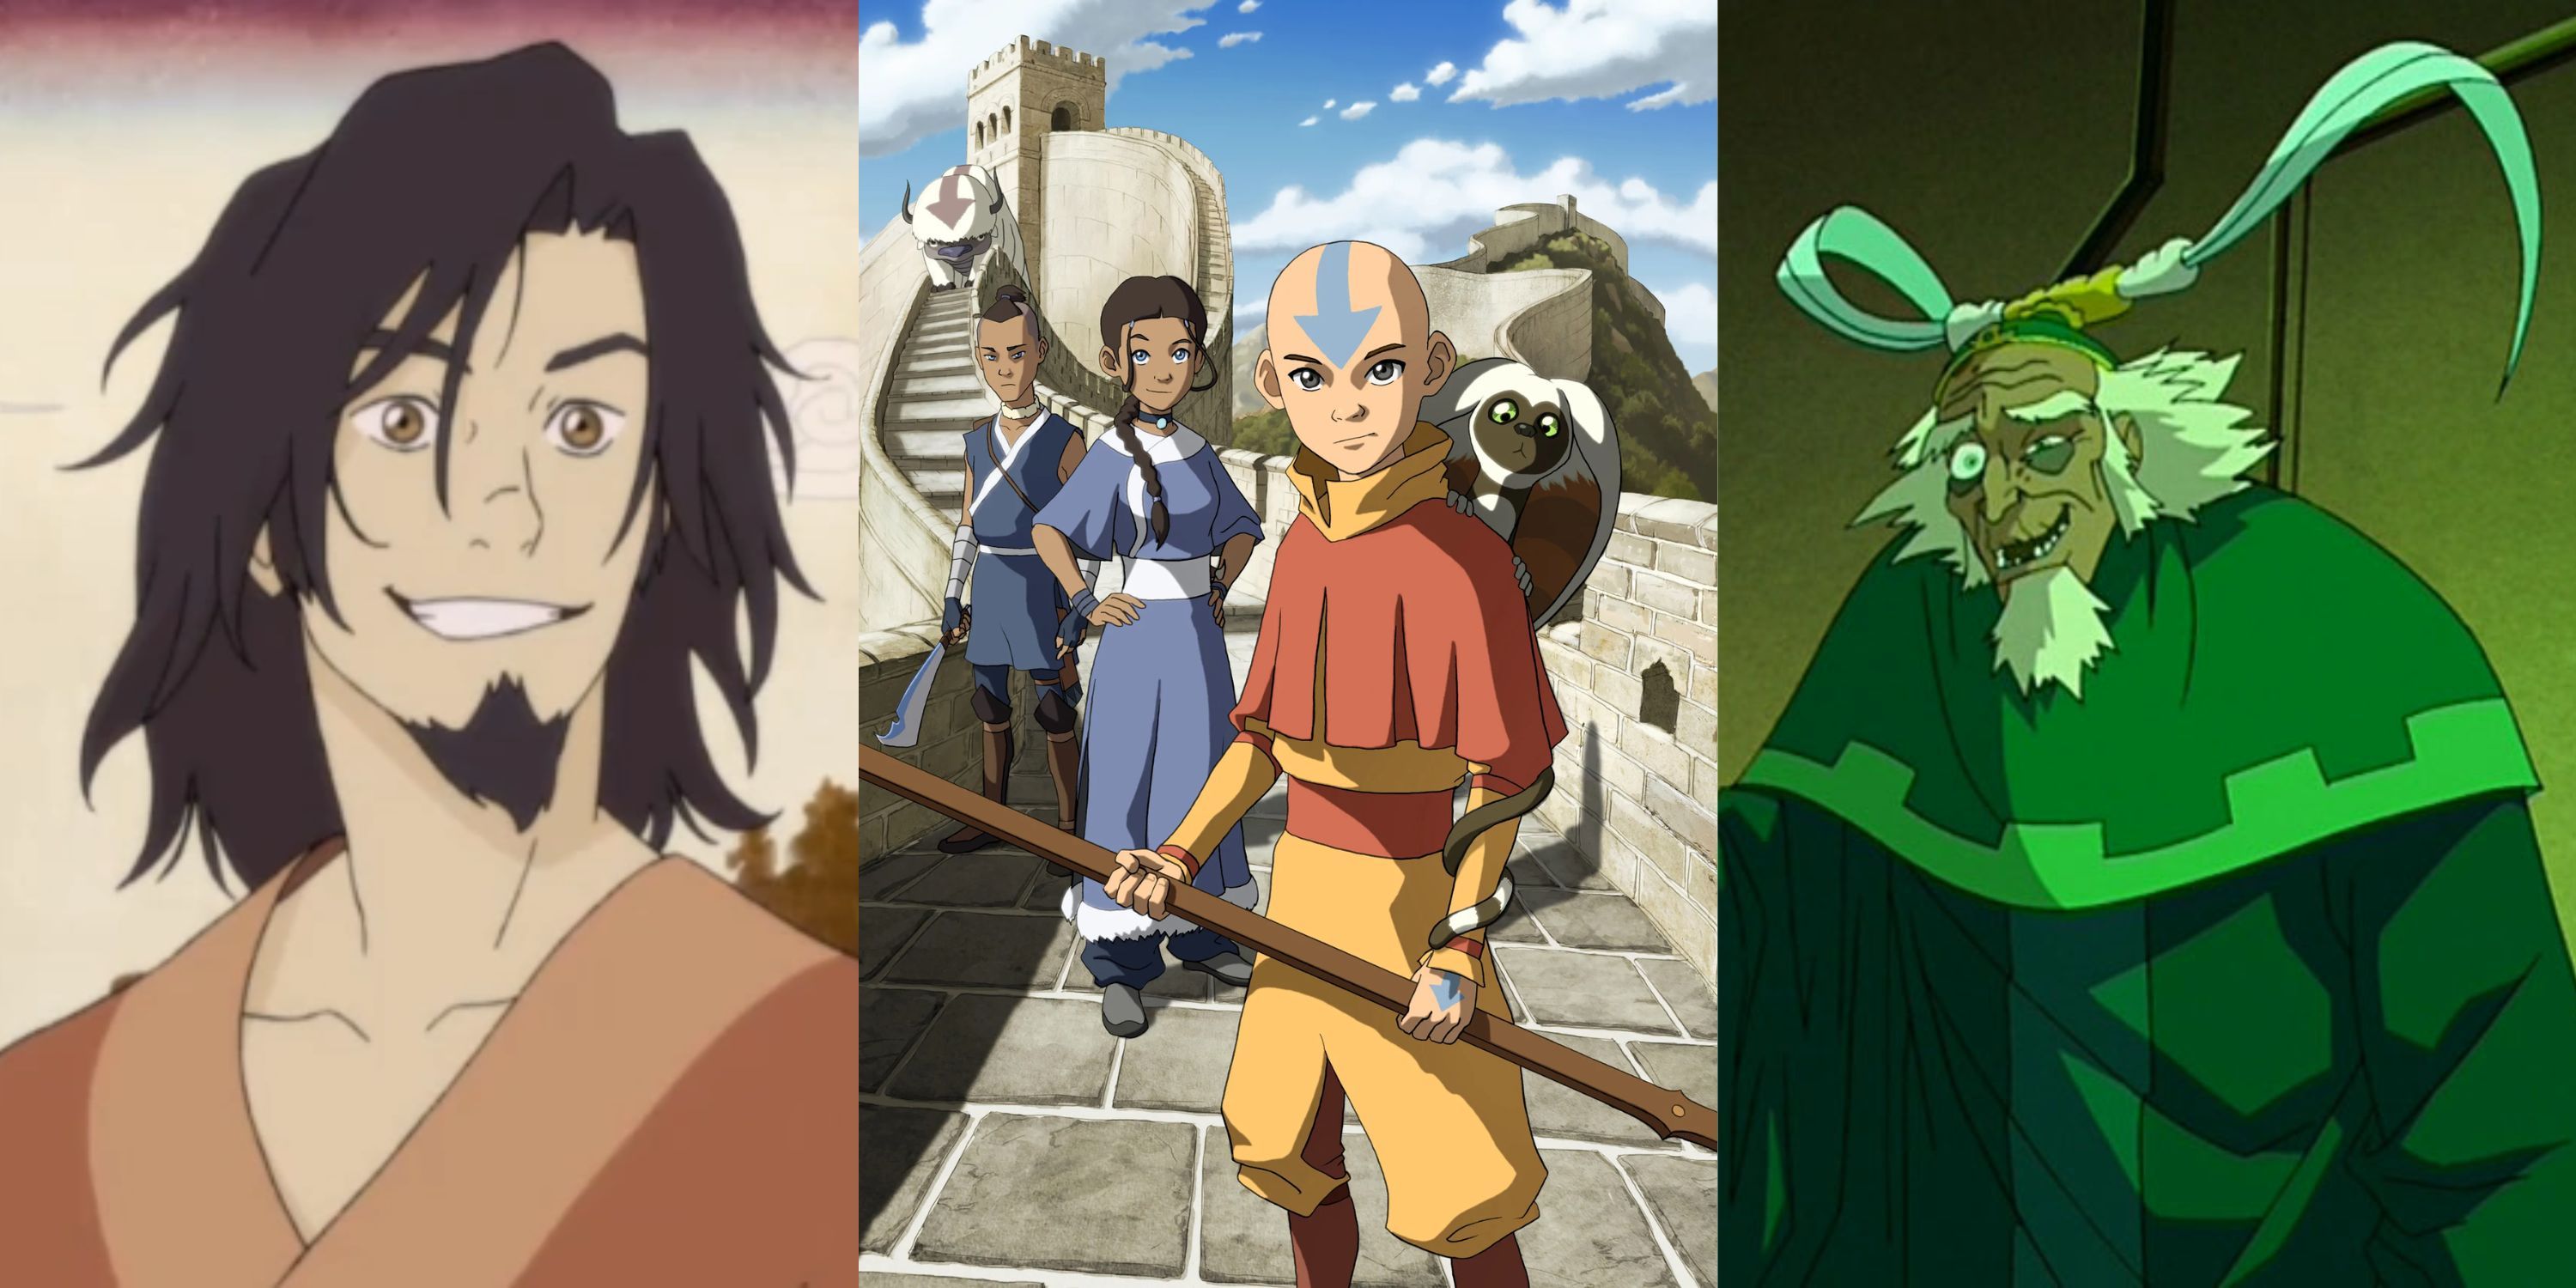 Split image of characters from the Avatar universe